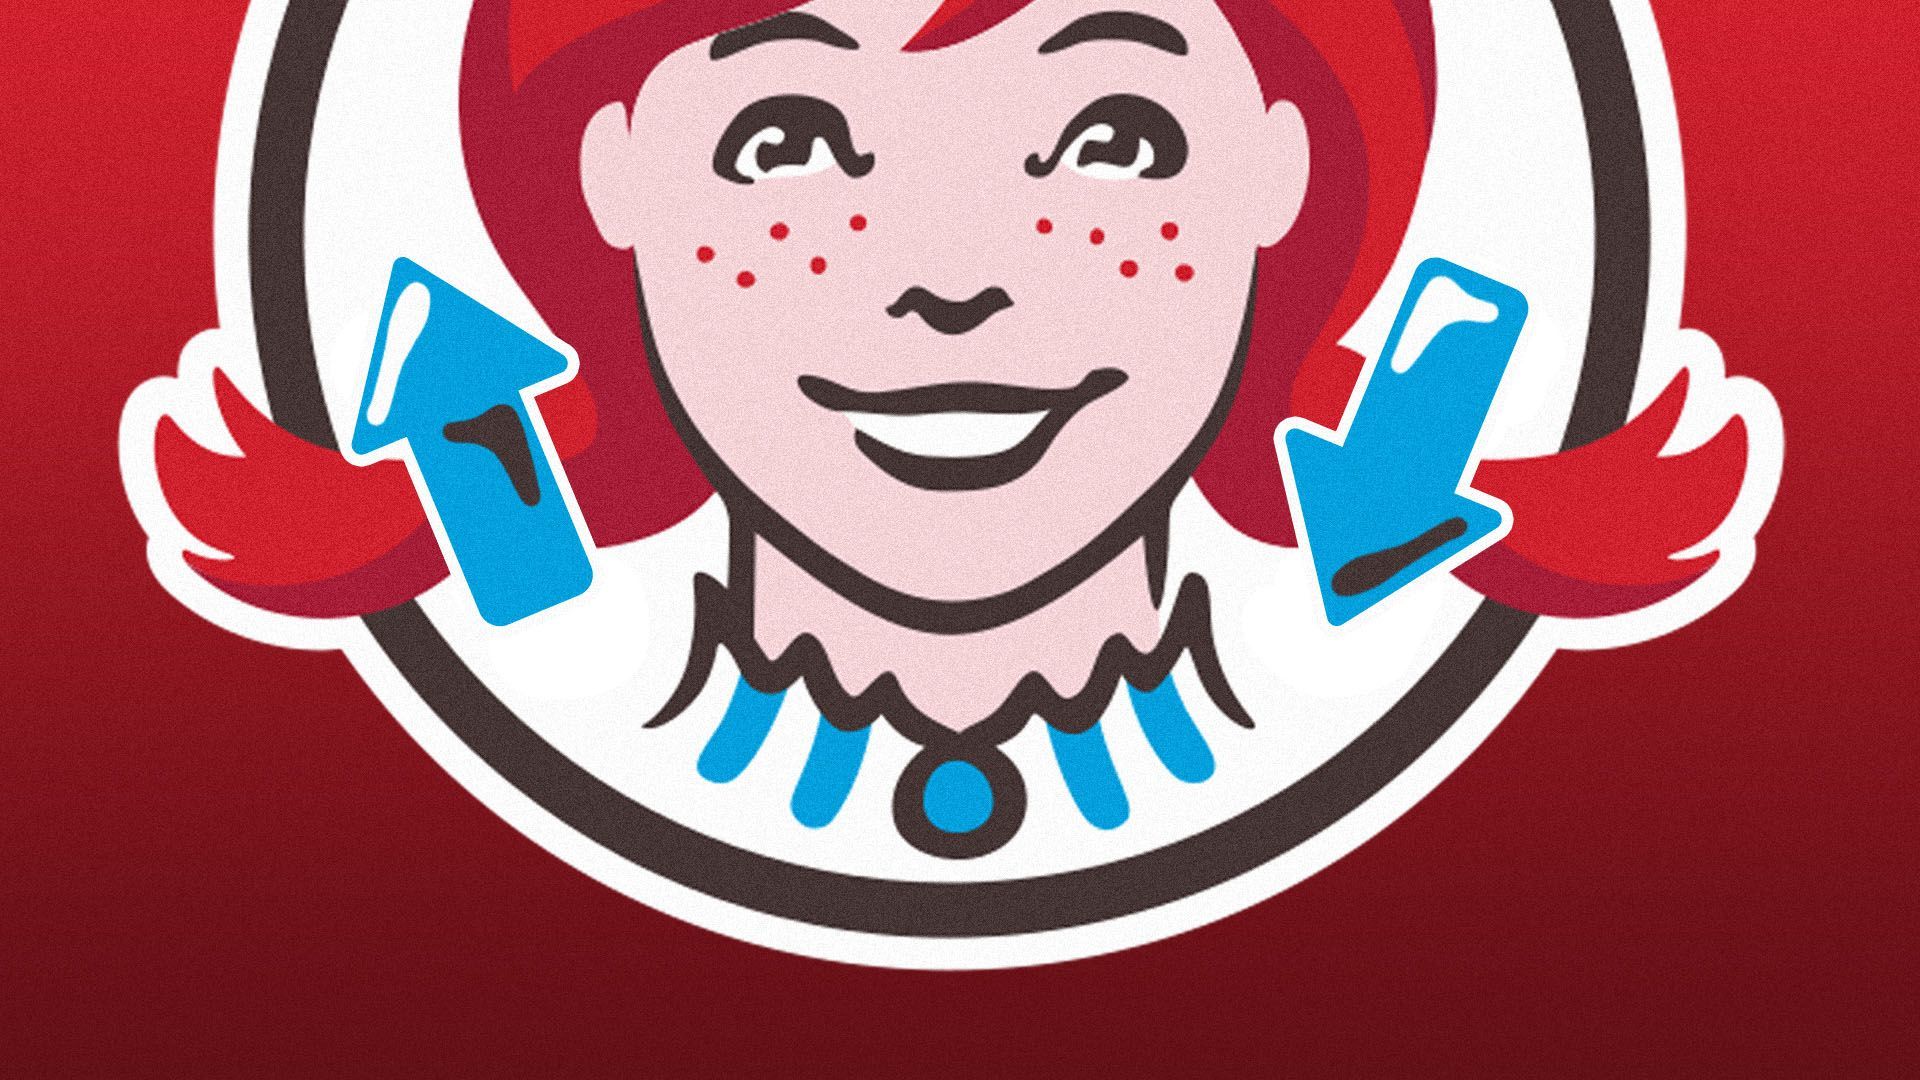 Illustration of Wendy from the Wendy's logo with upwards and downwards facing arrows in place of her hair bows